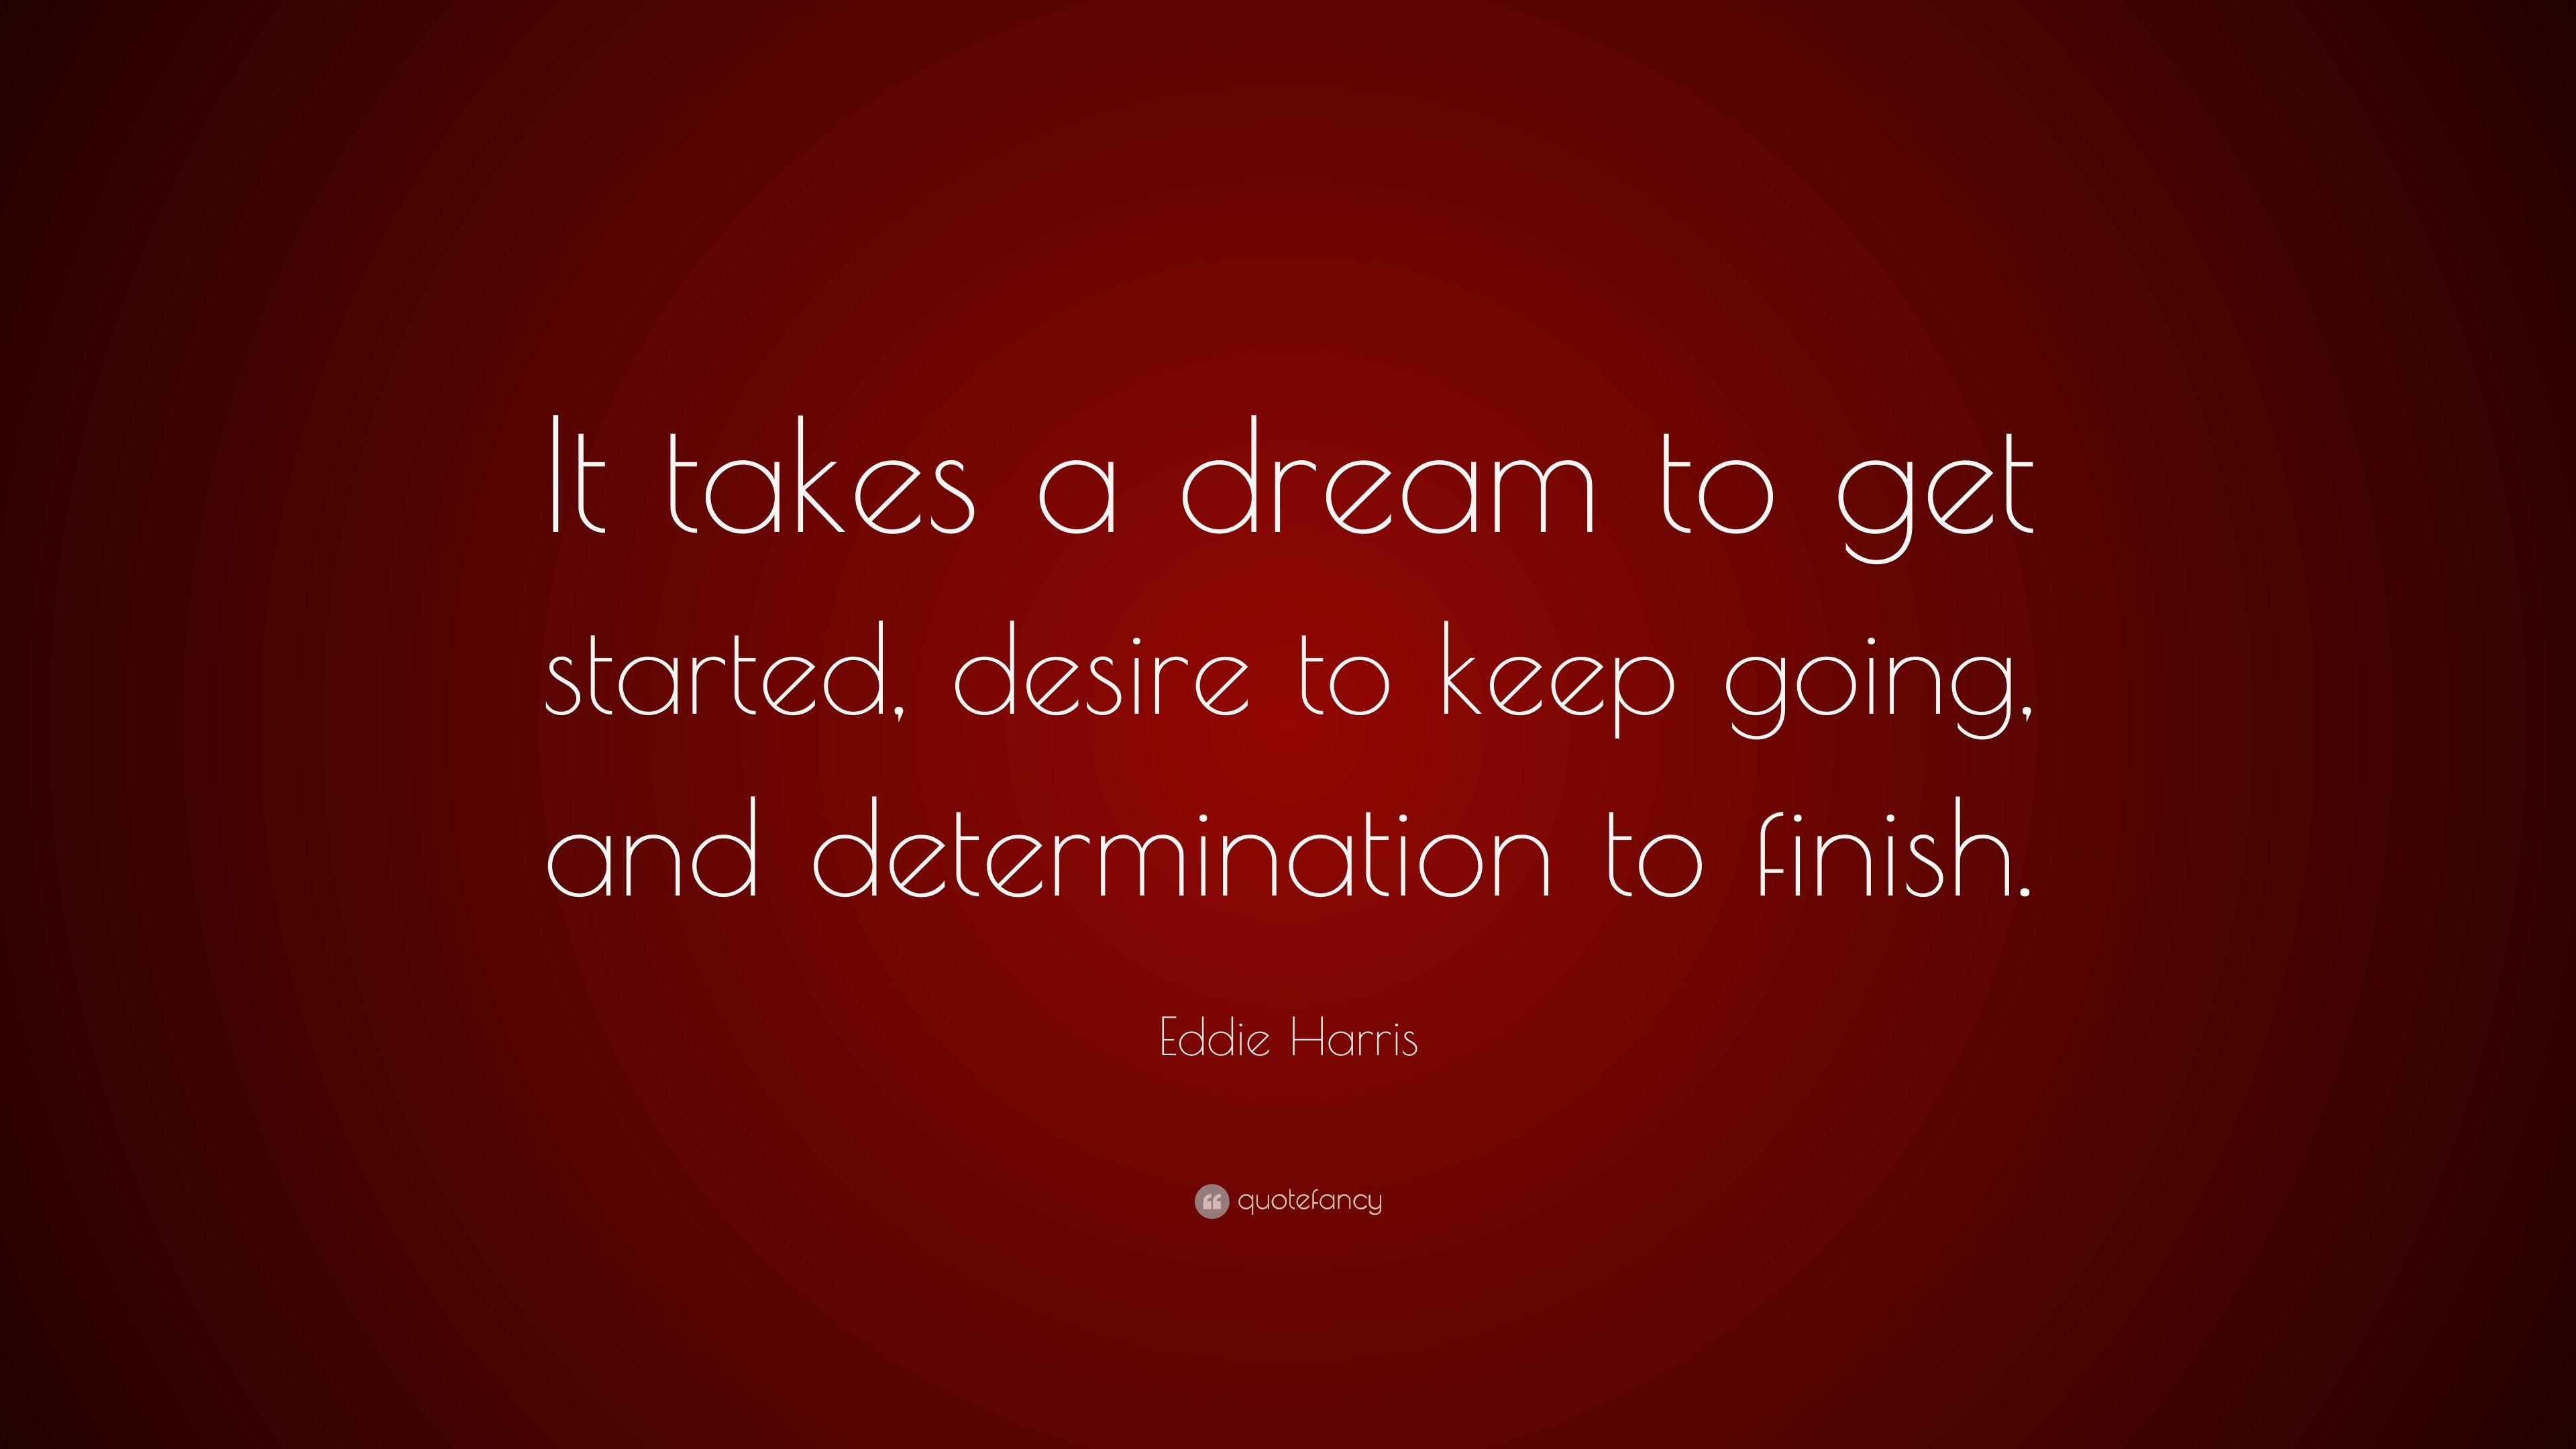 Eddie Harris Quote: “It takes a dream to get started, desire to keep